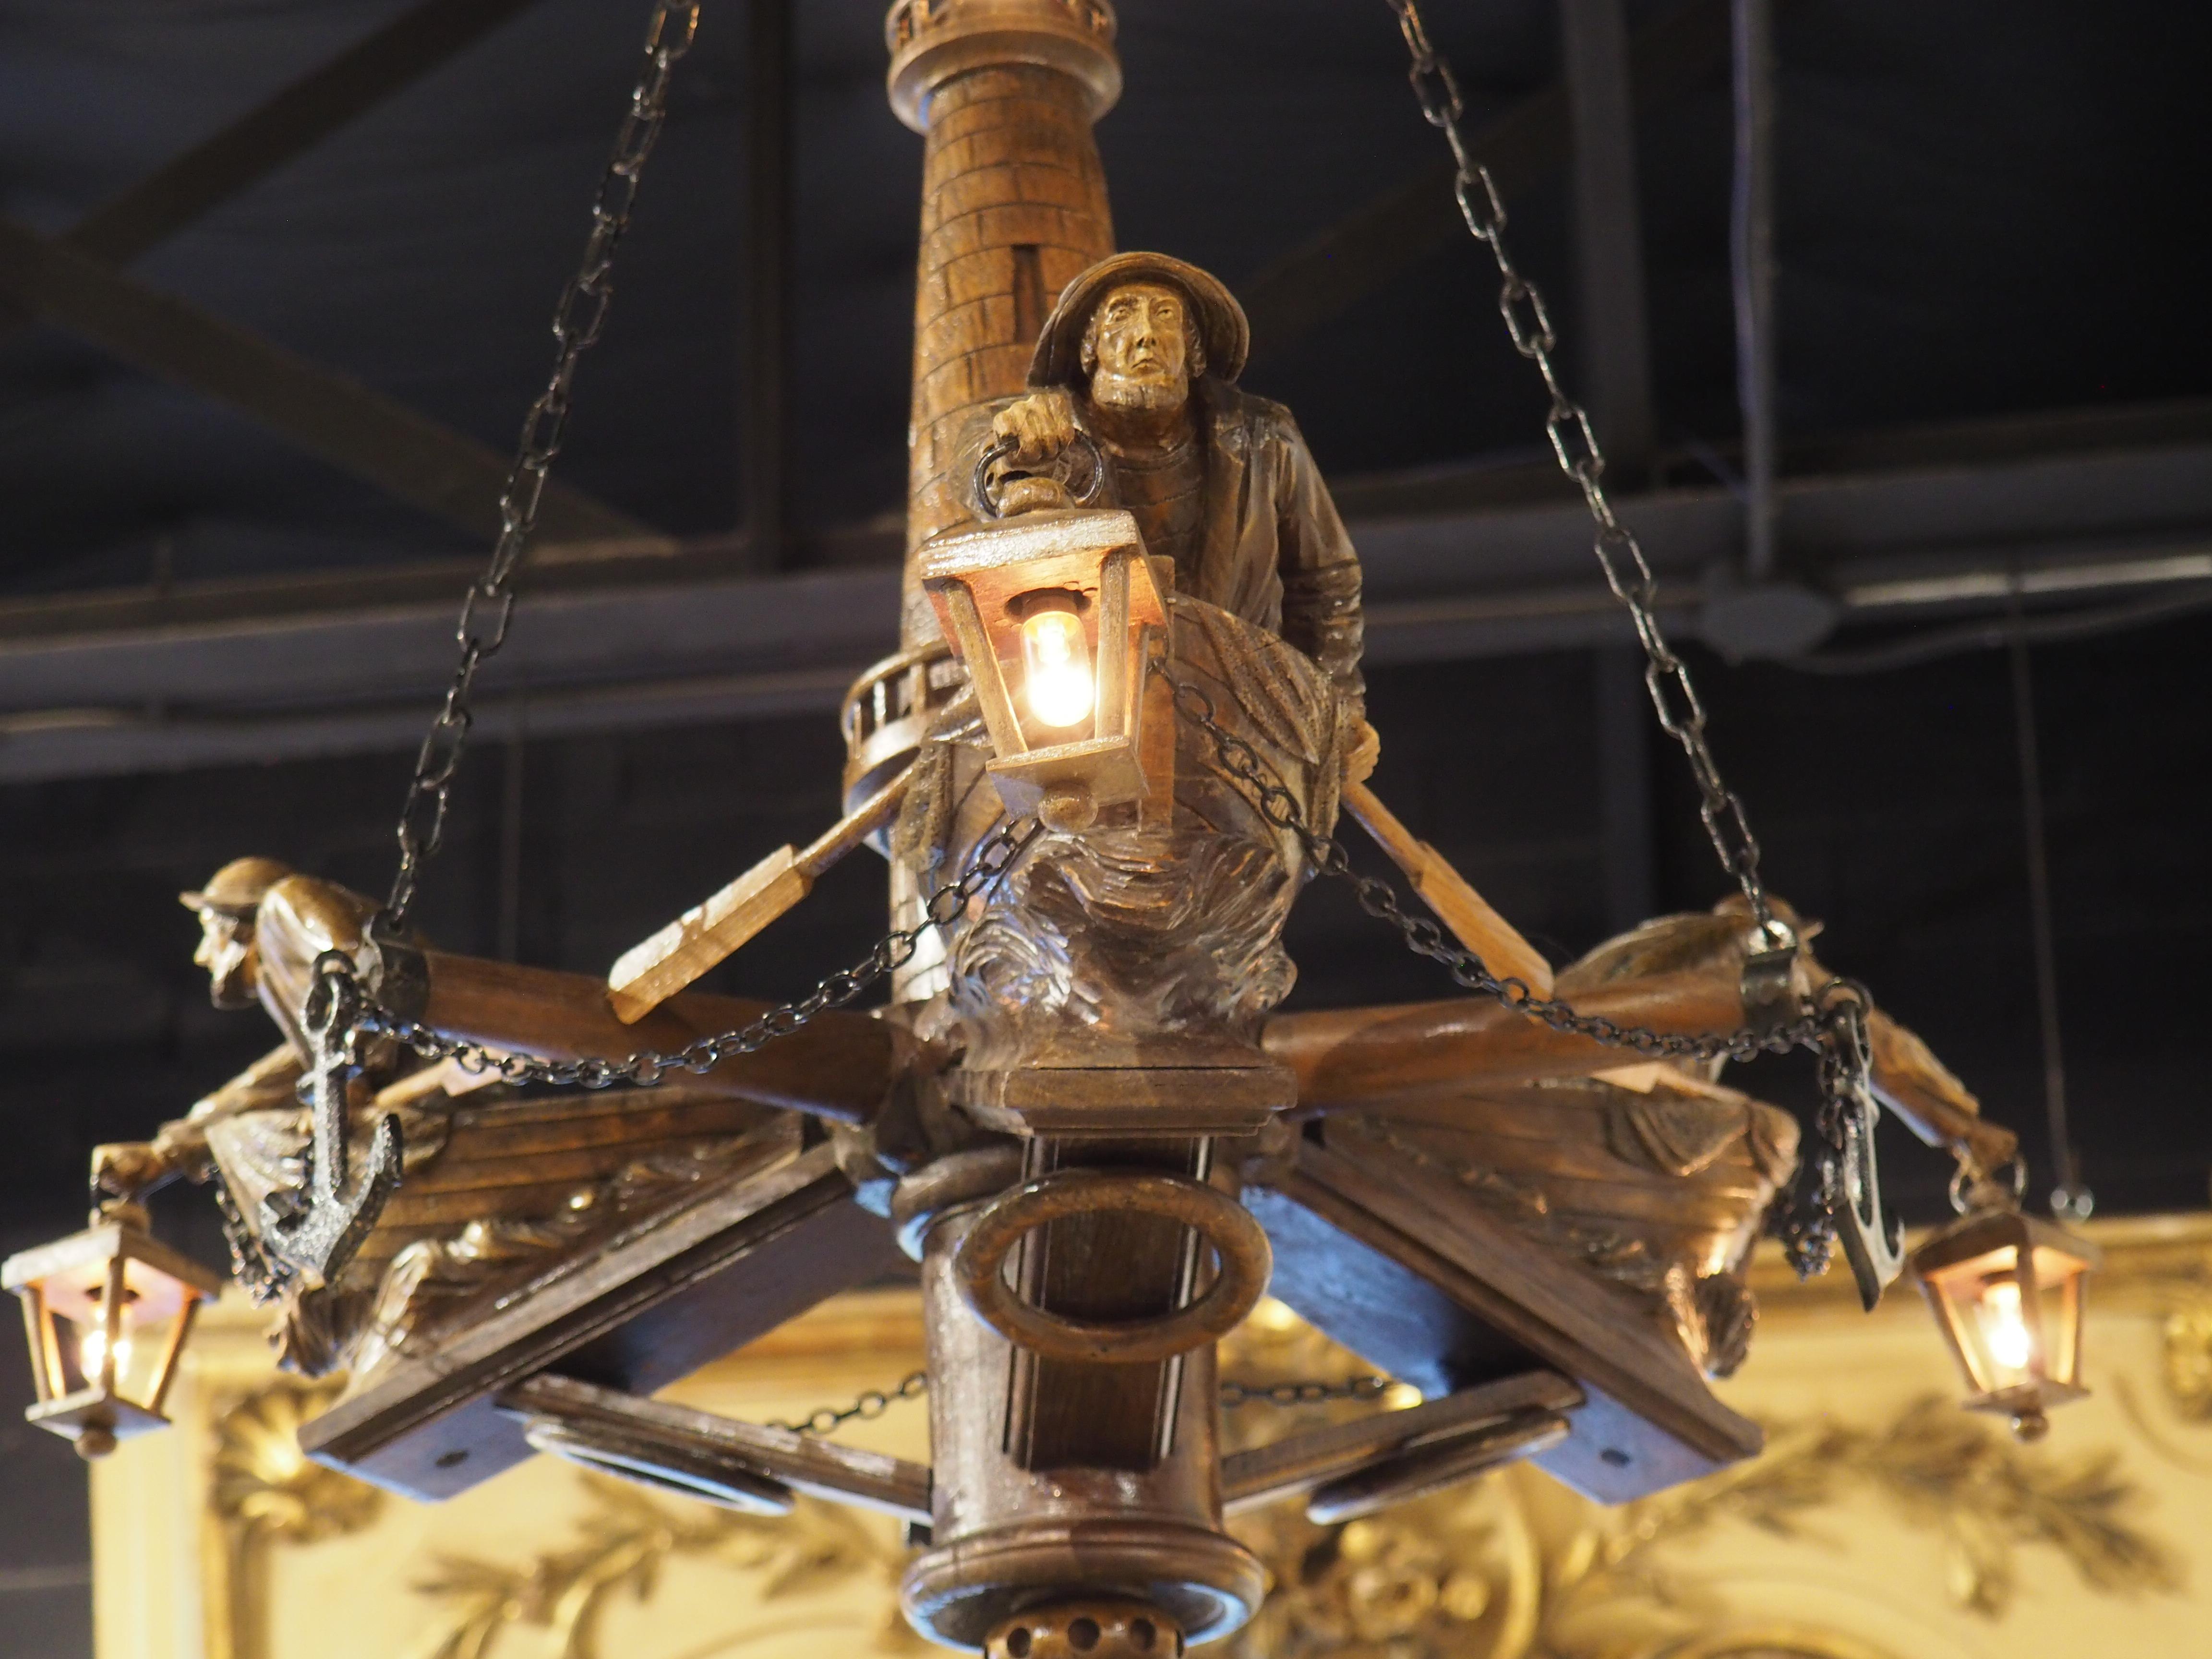 Based on the 19th-century folklore of the lost fisherman of St. Malo, France, this highly carved wooden chandelier also incorporates maritime legends with inscribed boats and life preservers. Hand-carved in the early 1900s in Brittany (Saint-Malo is